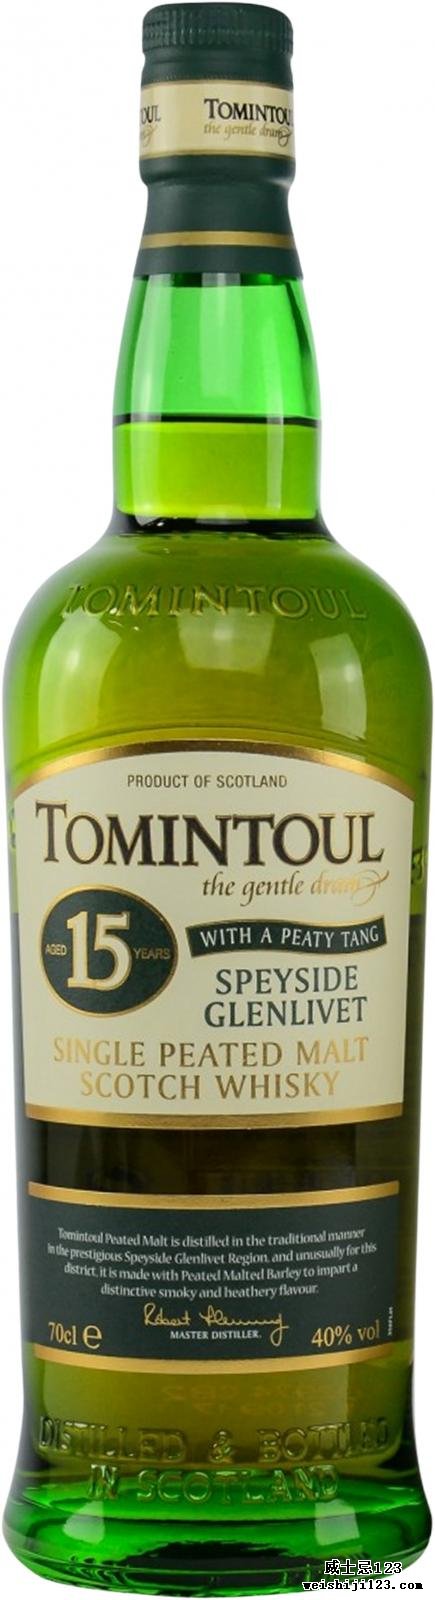 Tomintoul 15-year-old